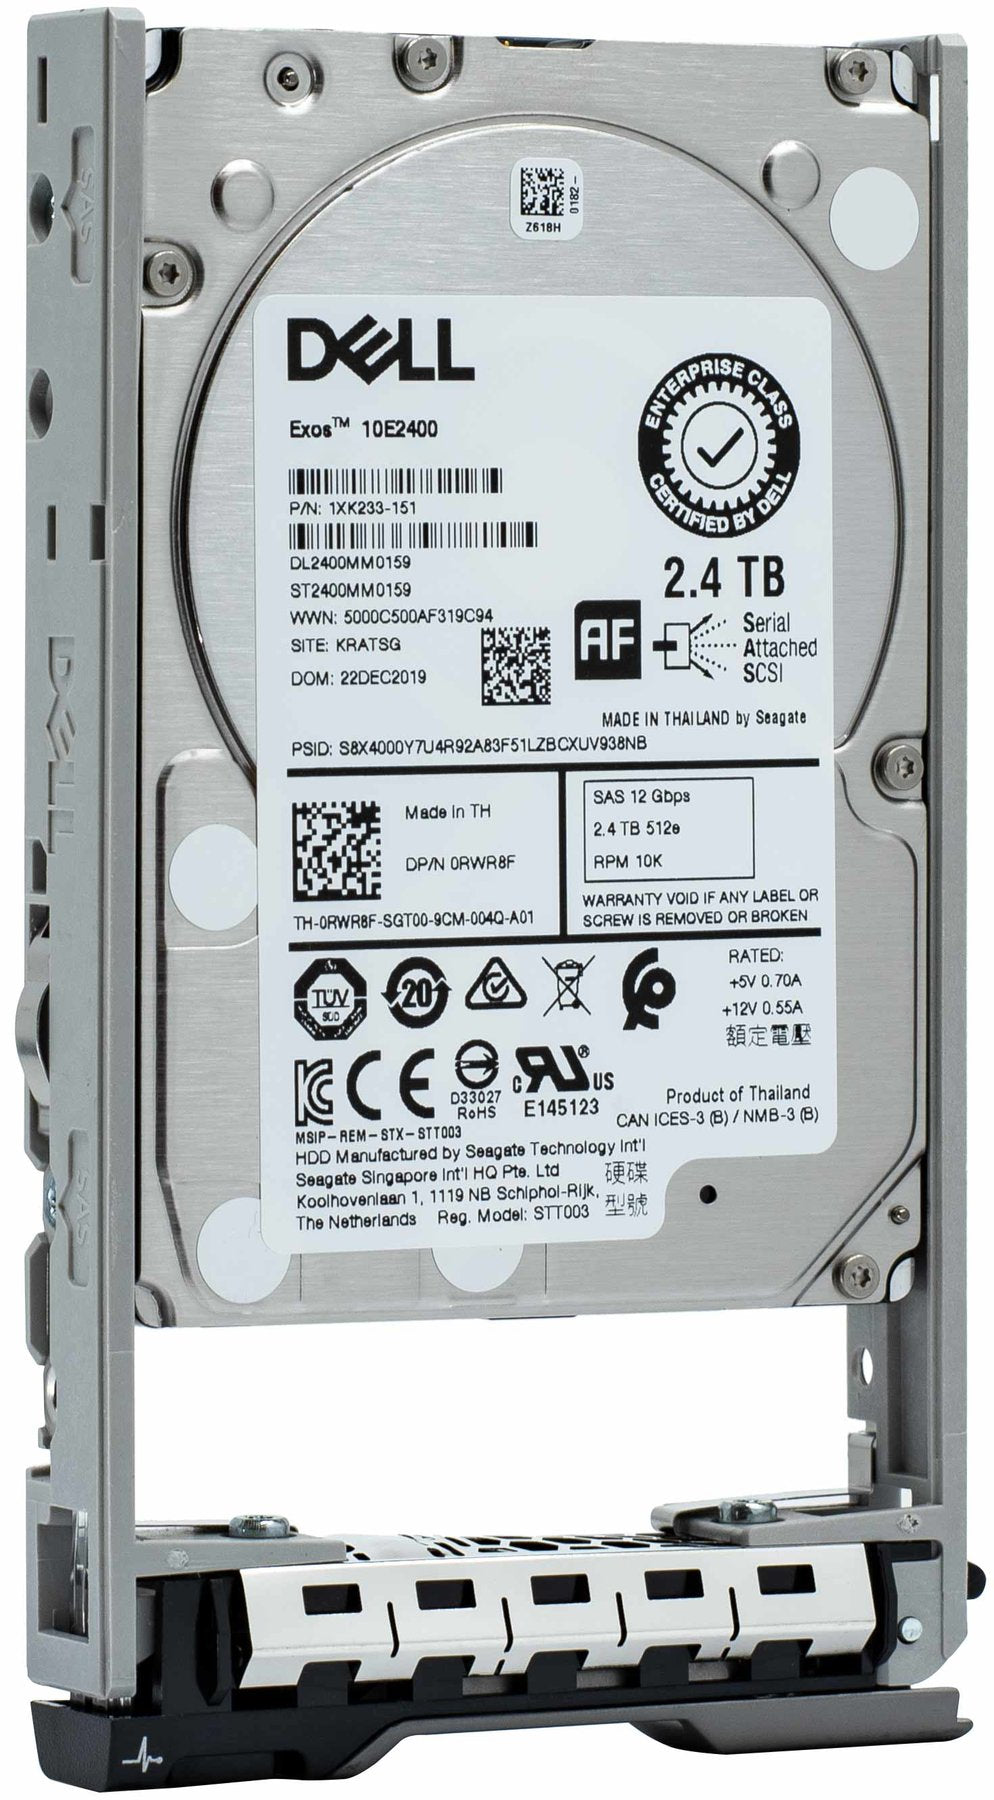 Dell G13 W9MNK 2.4TB 10K RPM SAS 12Gb/s 512e 2.5" Manufacturer Recertified HDD